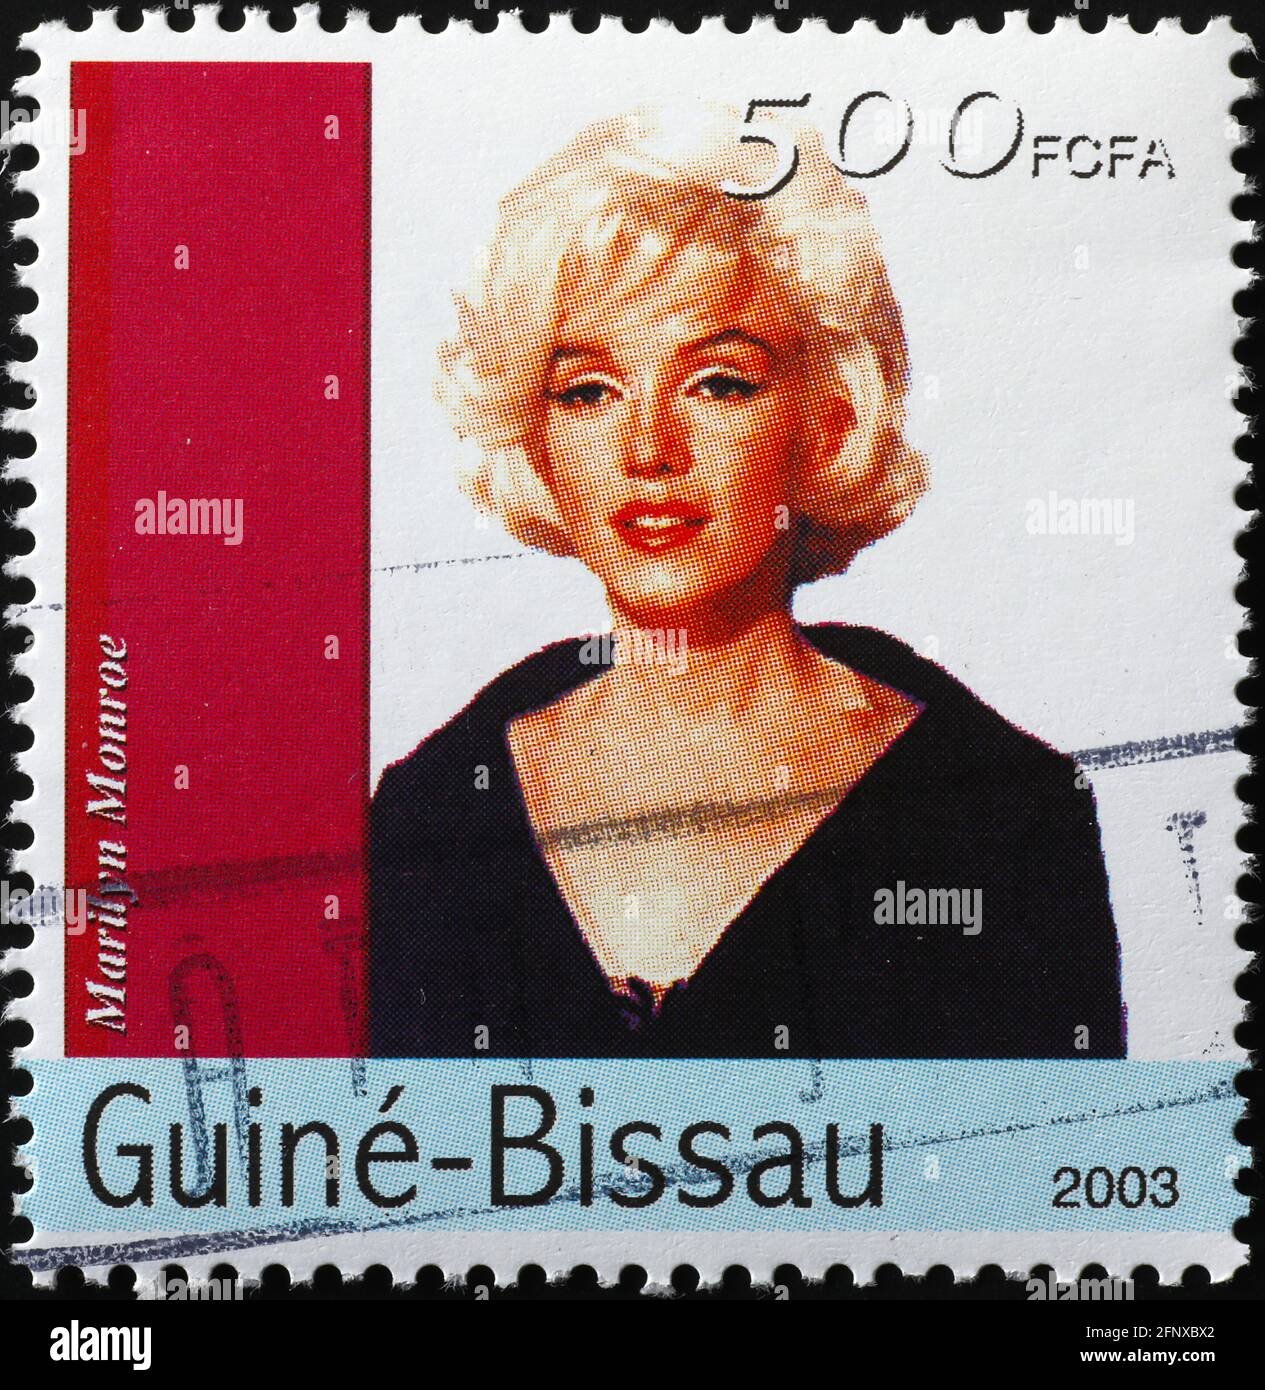 Marilyn Monroe portrait on postage stamp of Guinea Bissau Stock Photo